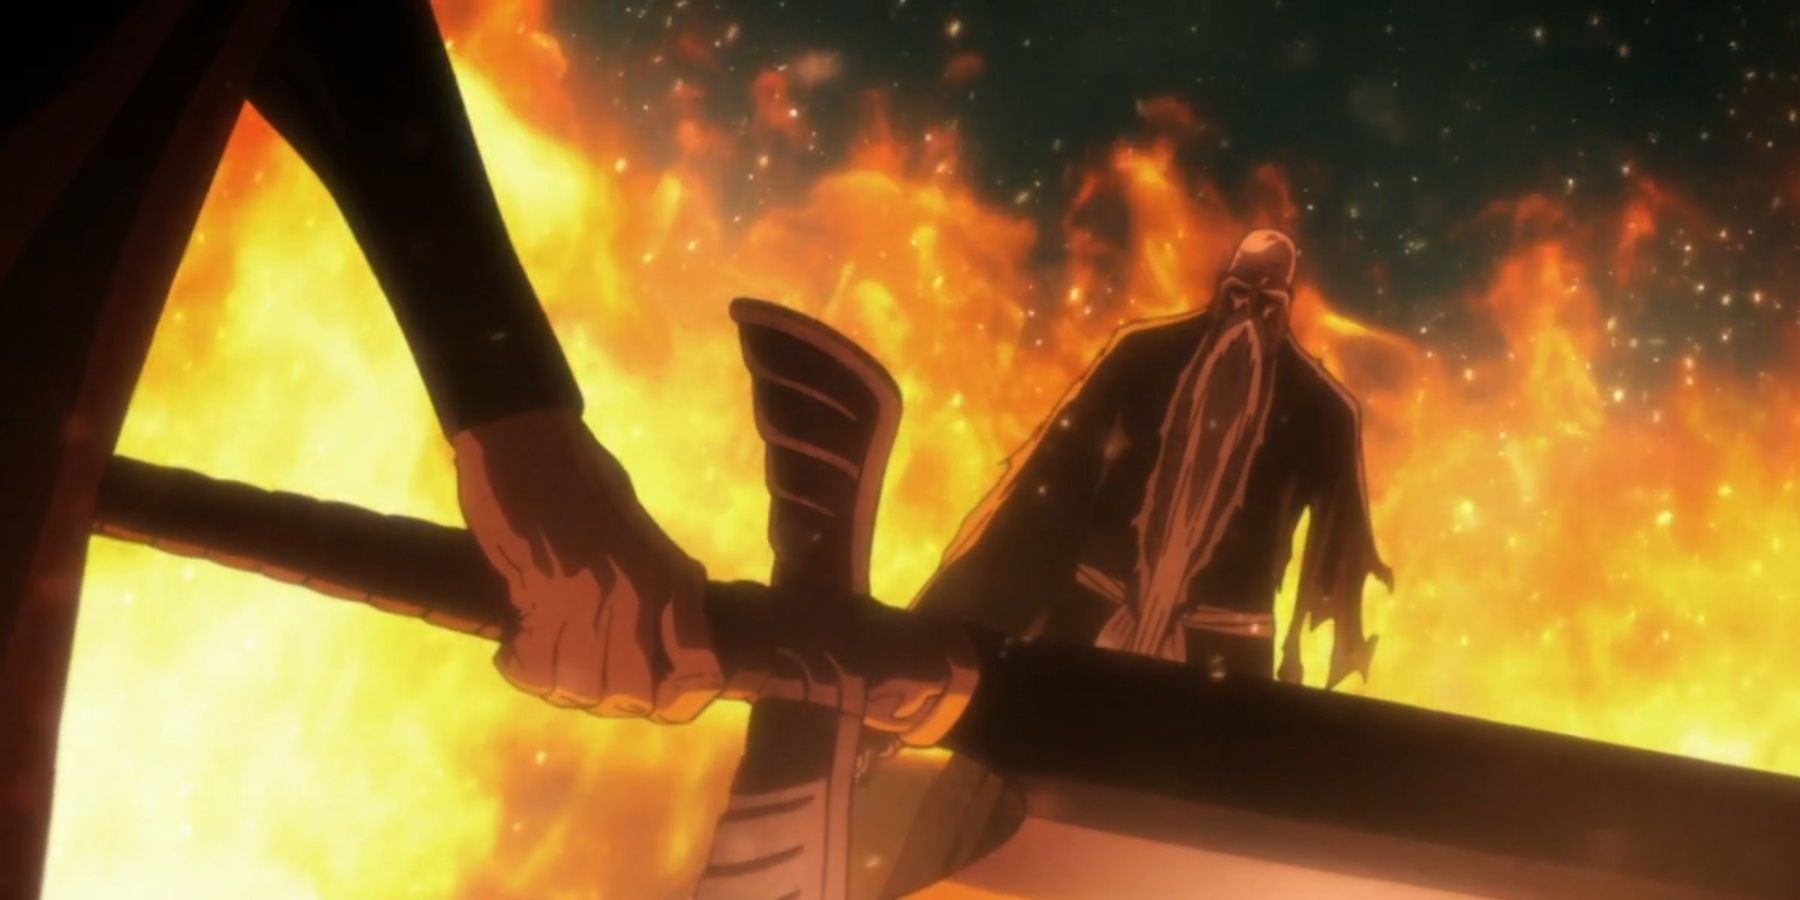 Yhwach holding his sword in the fire